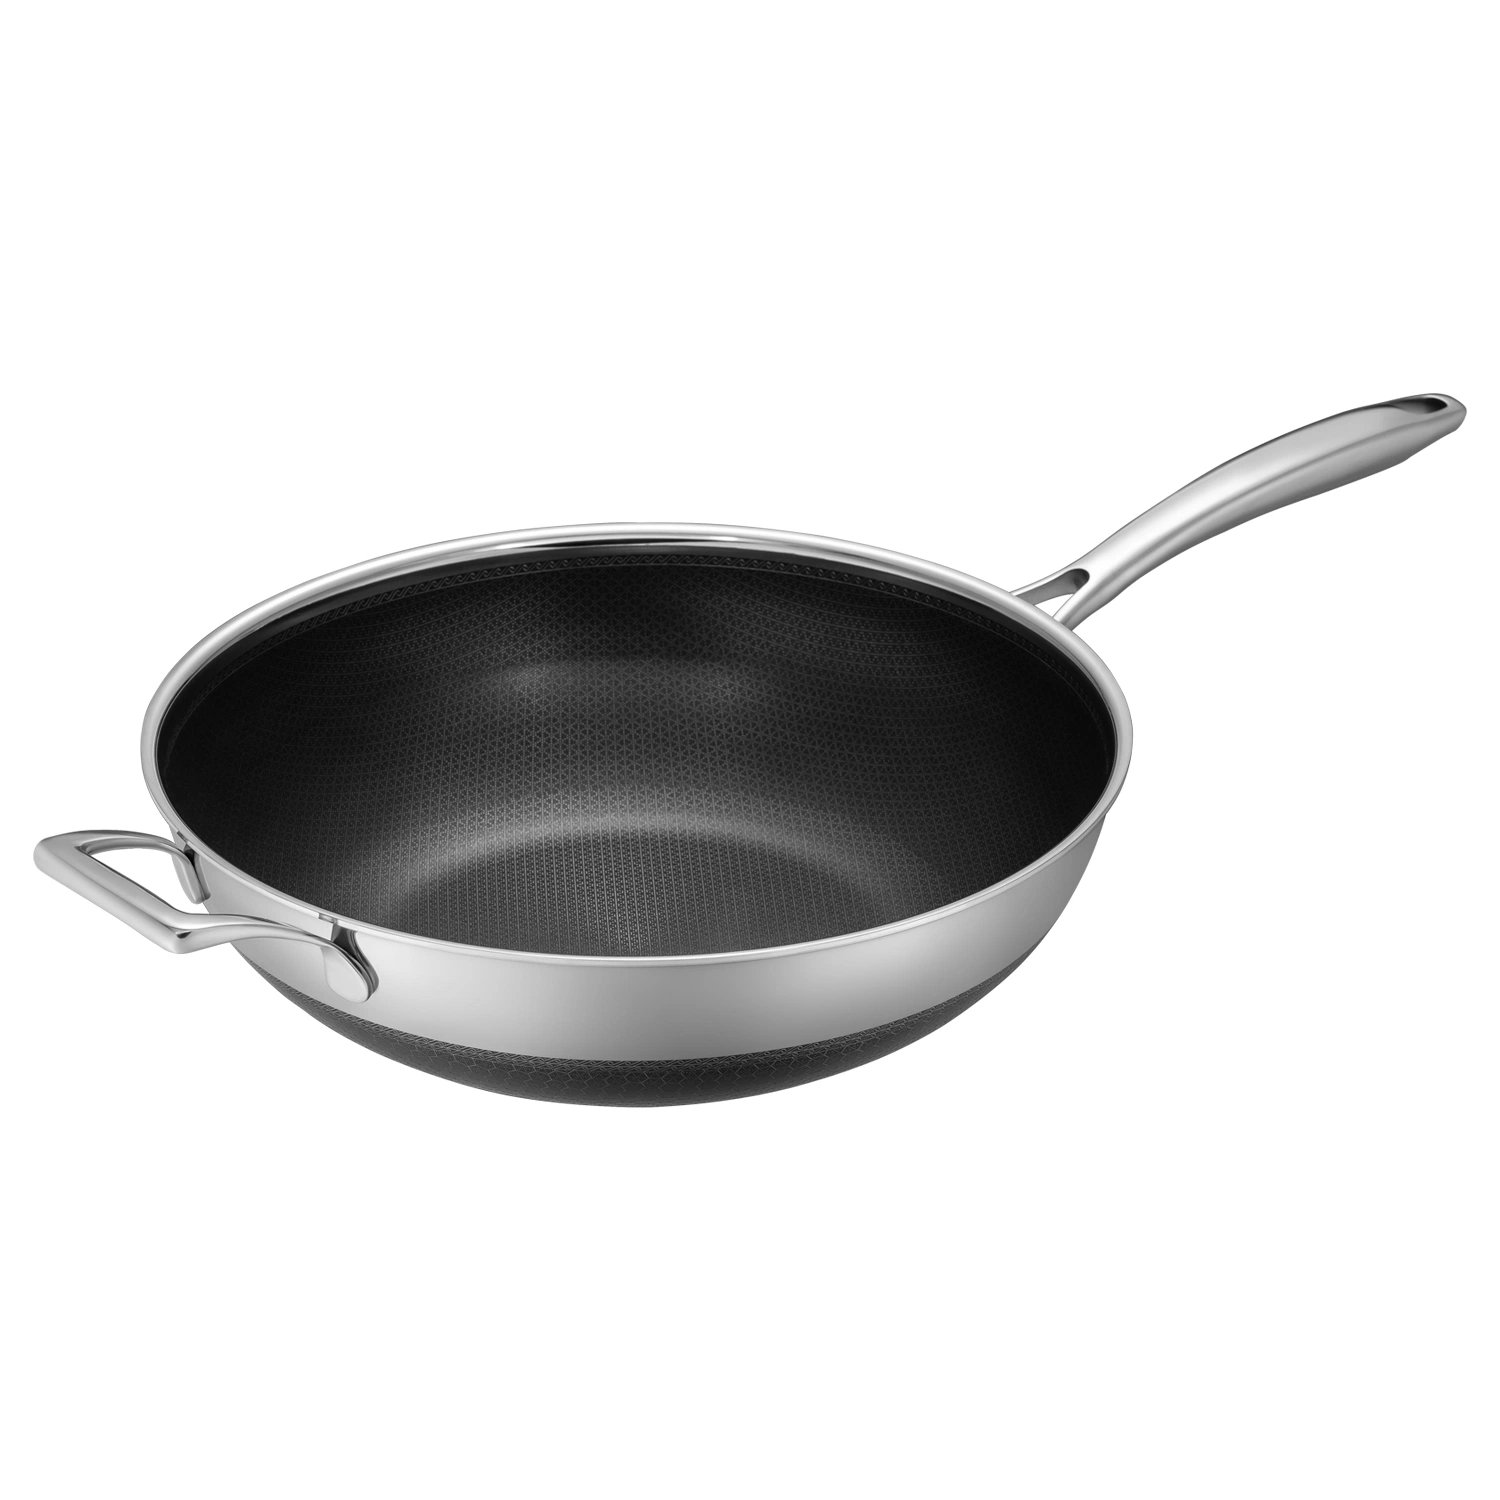 Hot Sales Cookware Stainless Steel Nonstick Double Layers Coating Skillet Pan